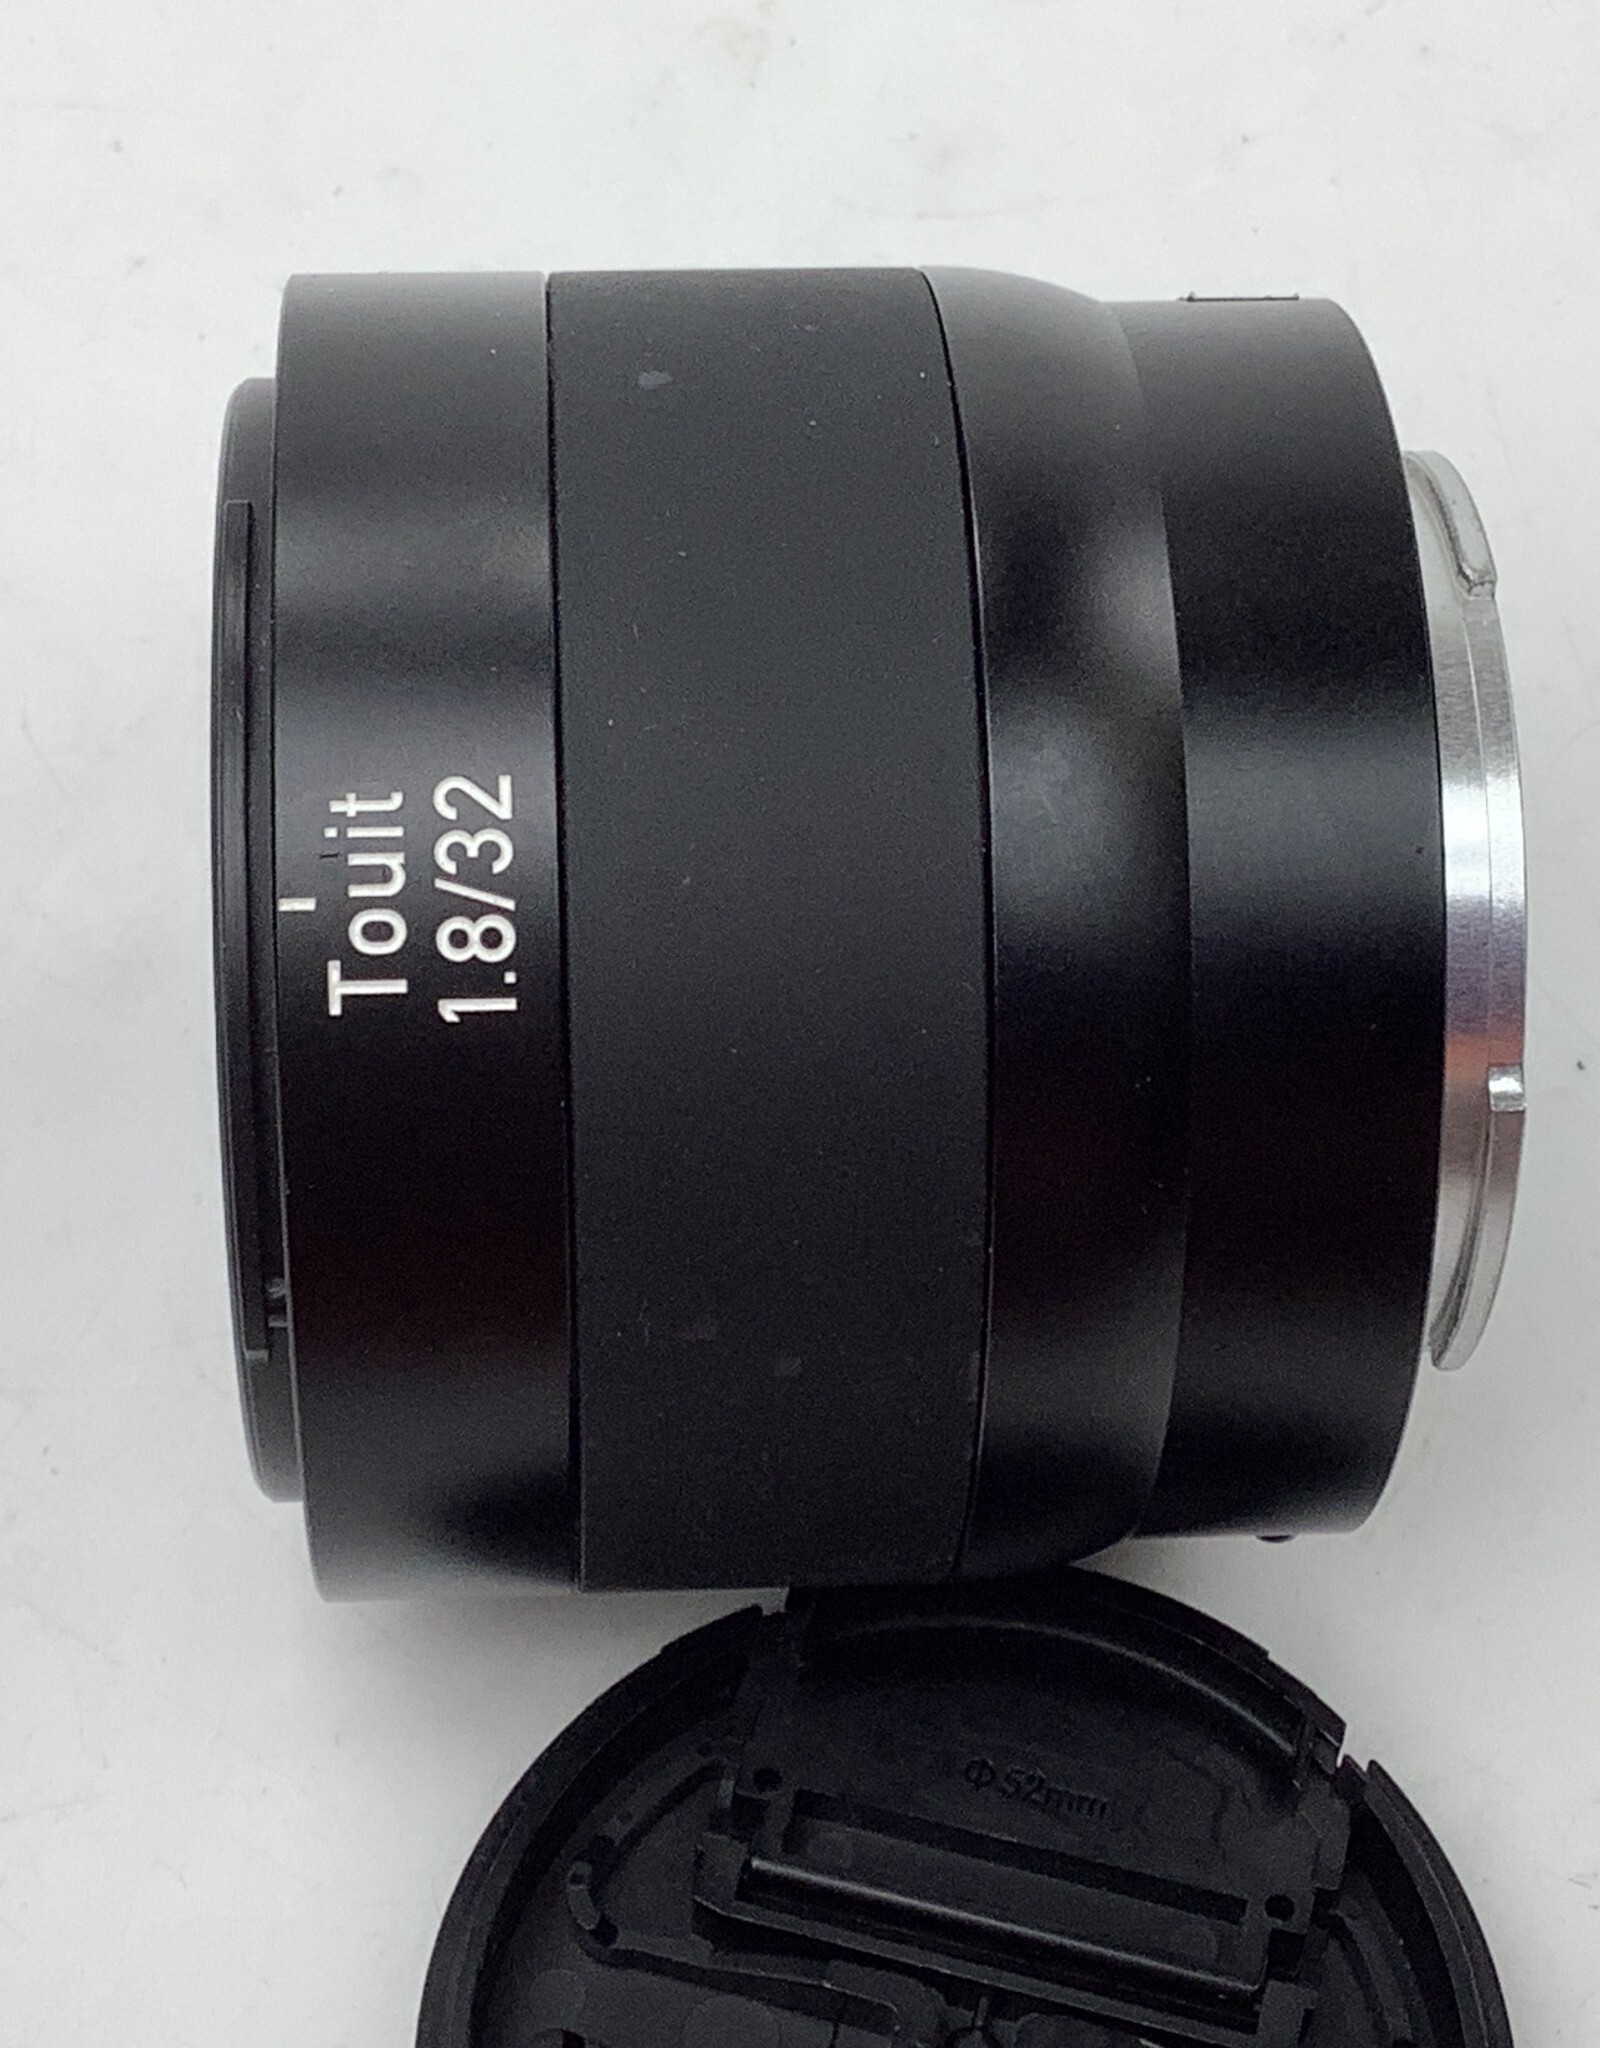 NIKON Zeiss Planar 32mm f1.8 T* Lens for Sony E Used Good